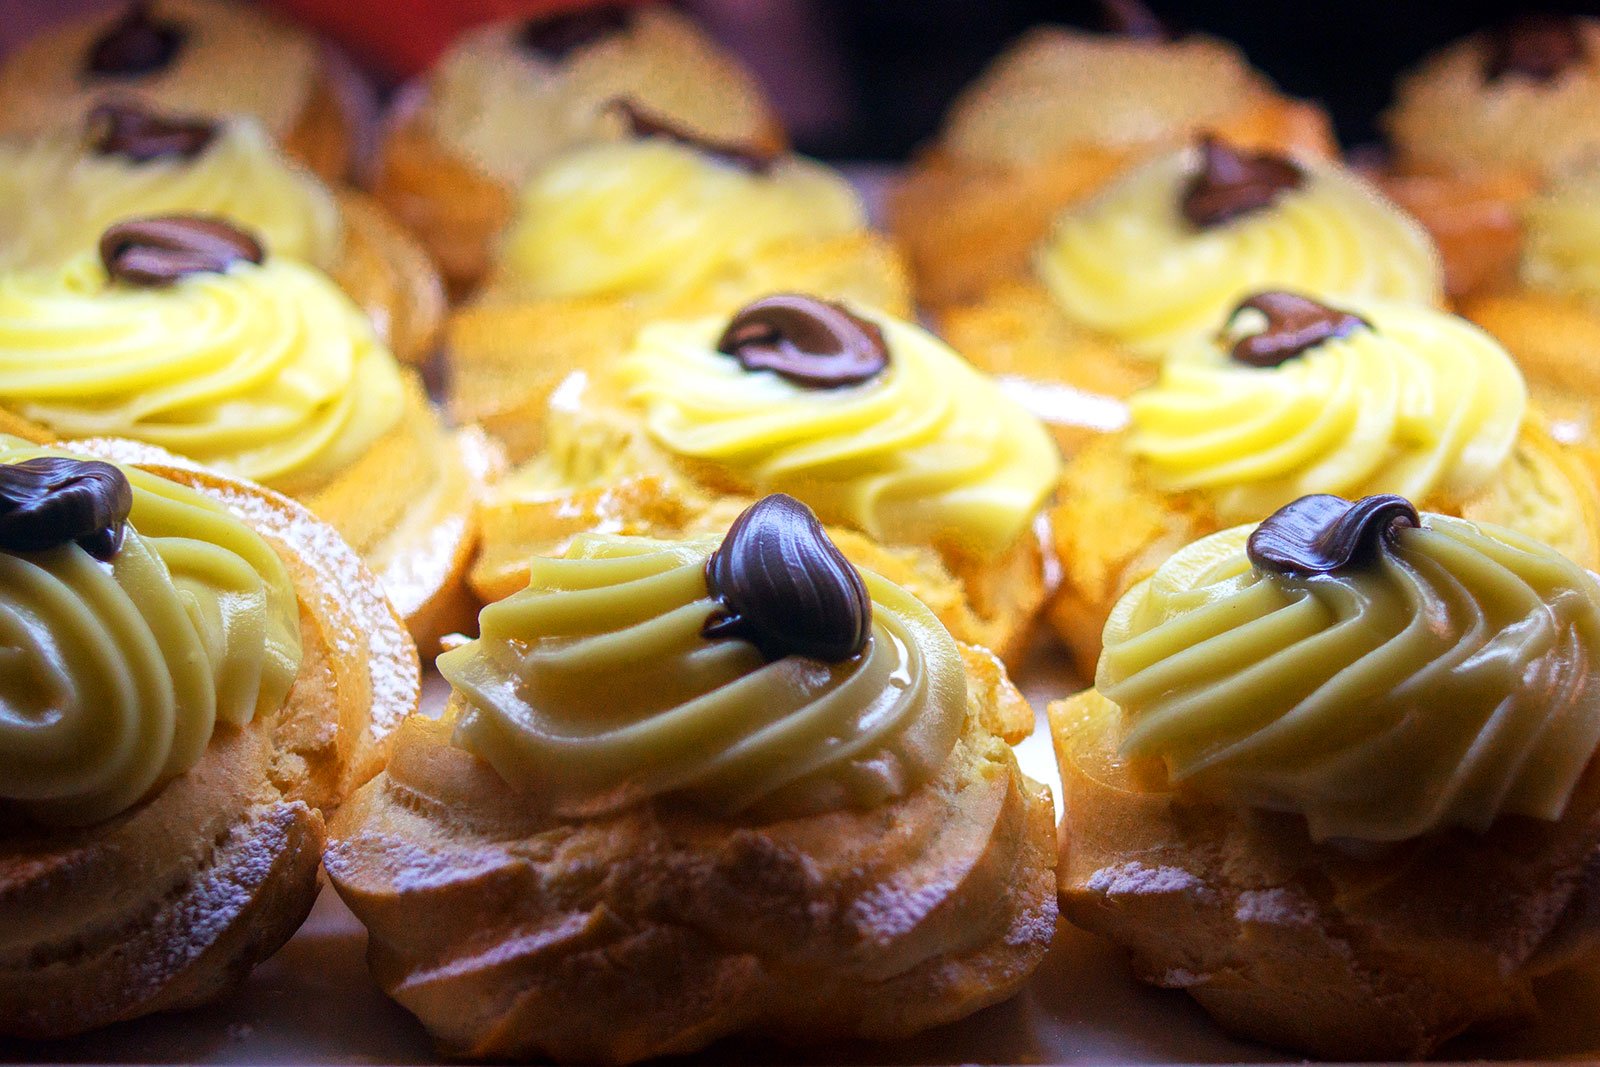 How to try zeppole in Rome